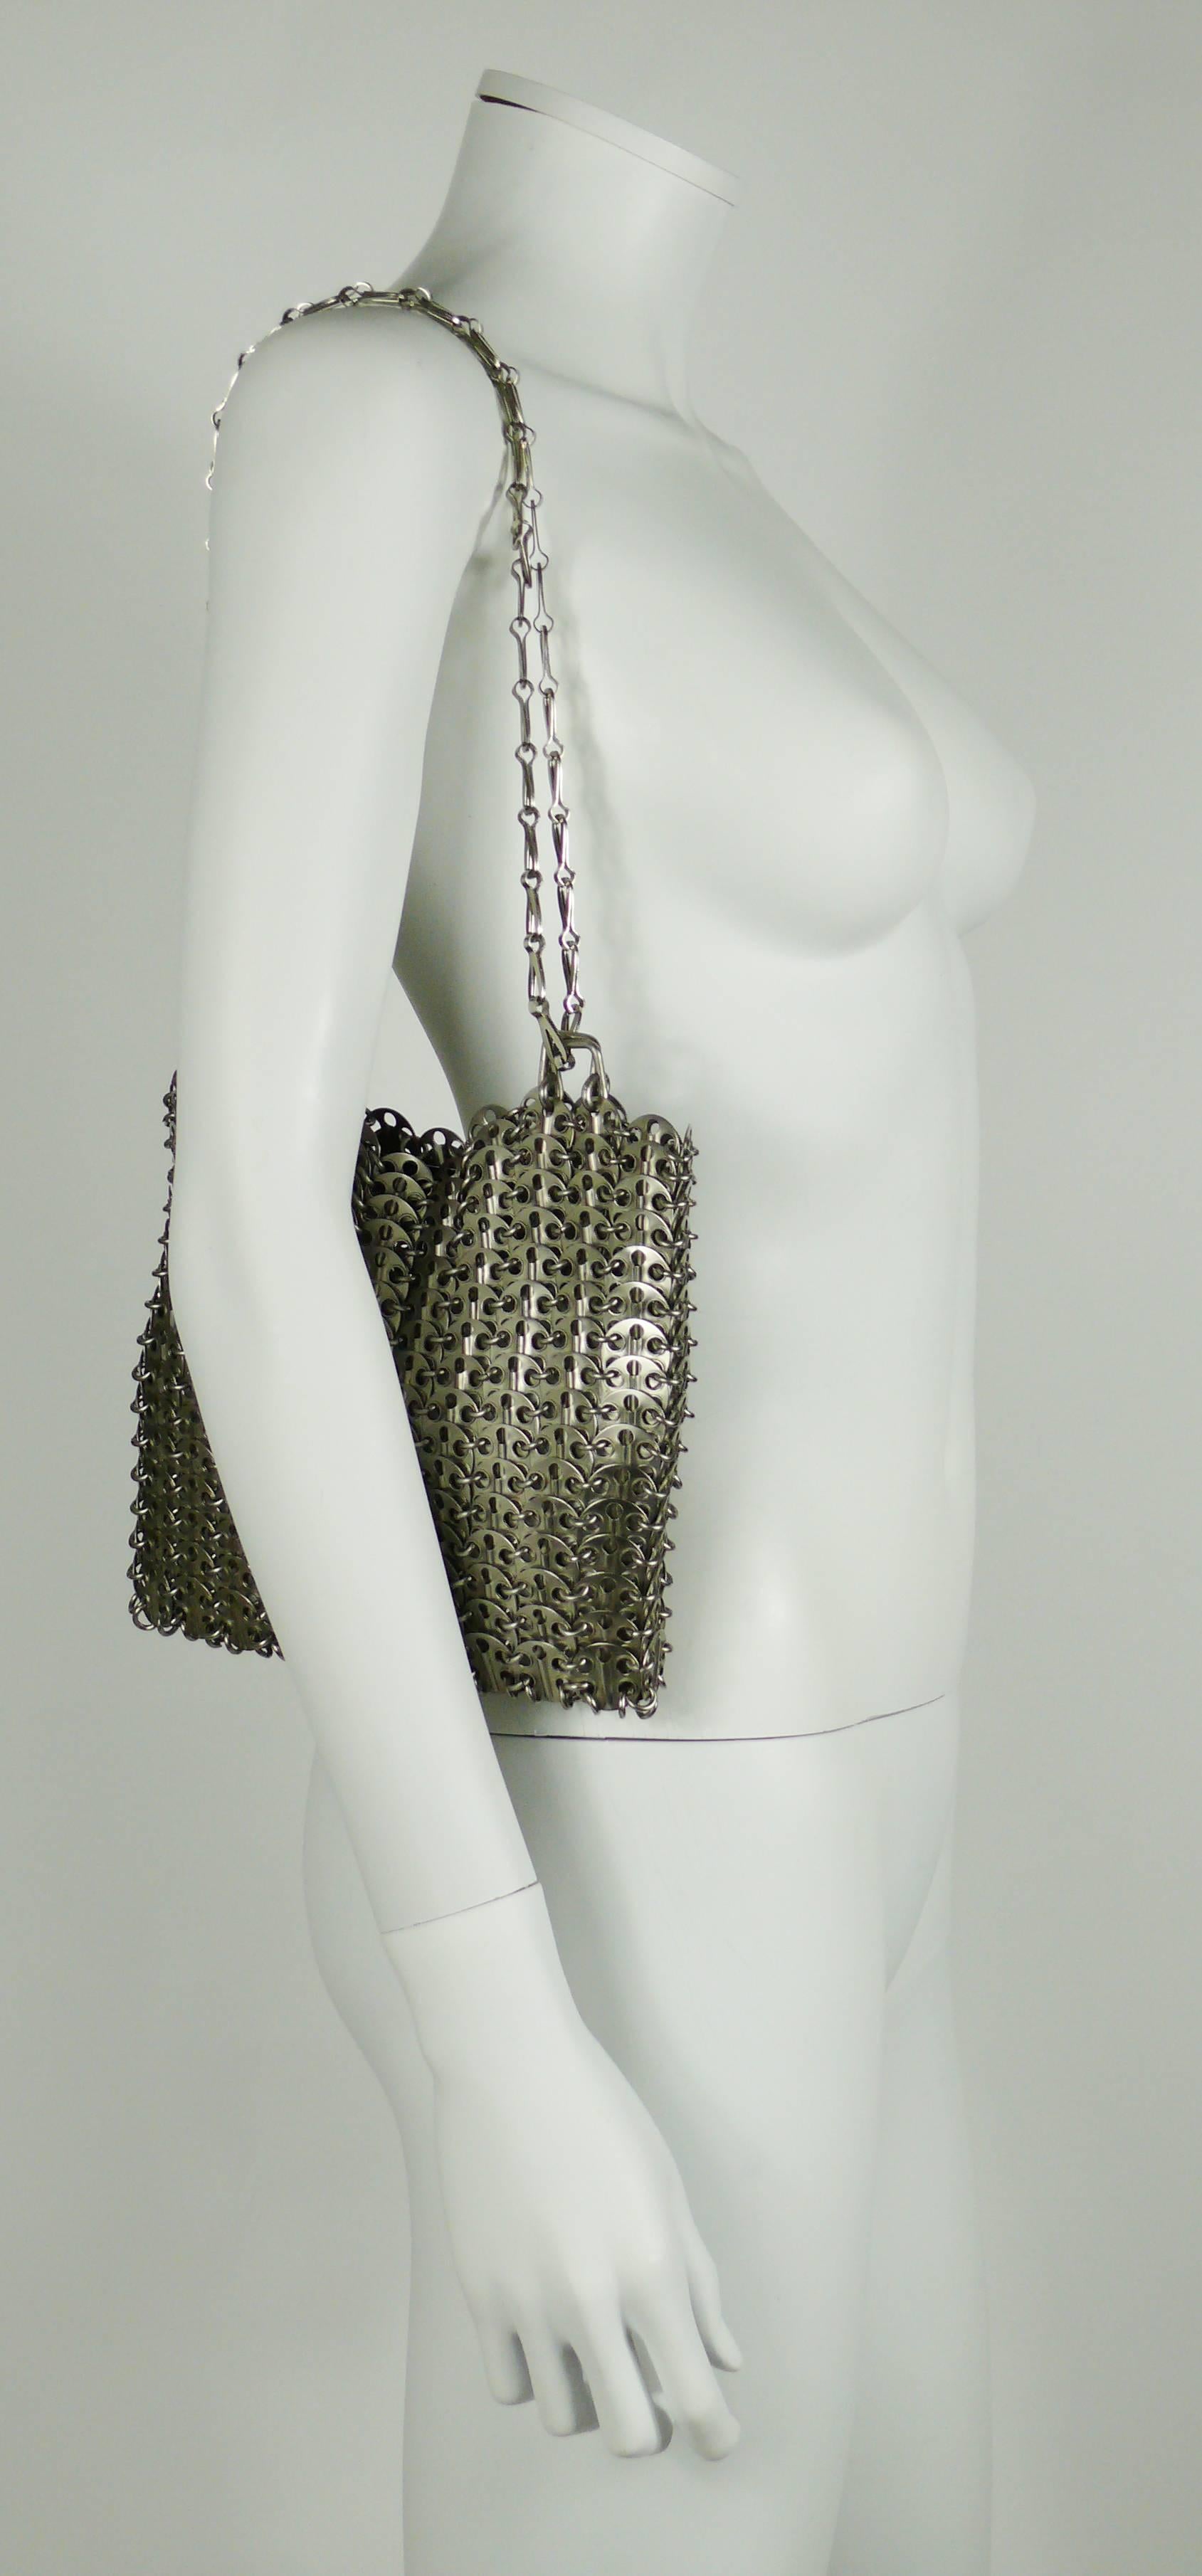 PACO RABANNE vintage iconic silver tone chain mail bag 